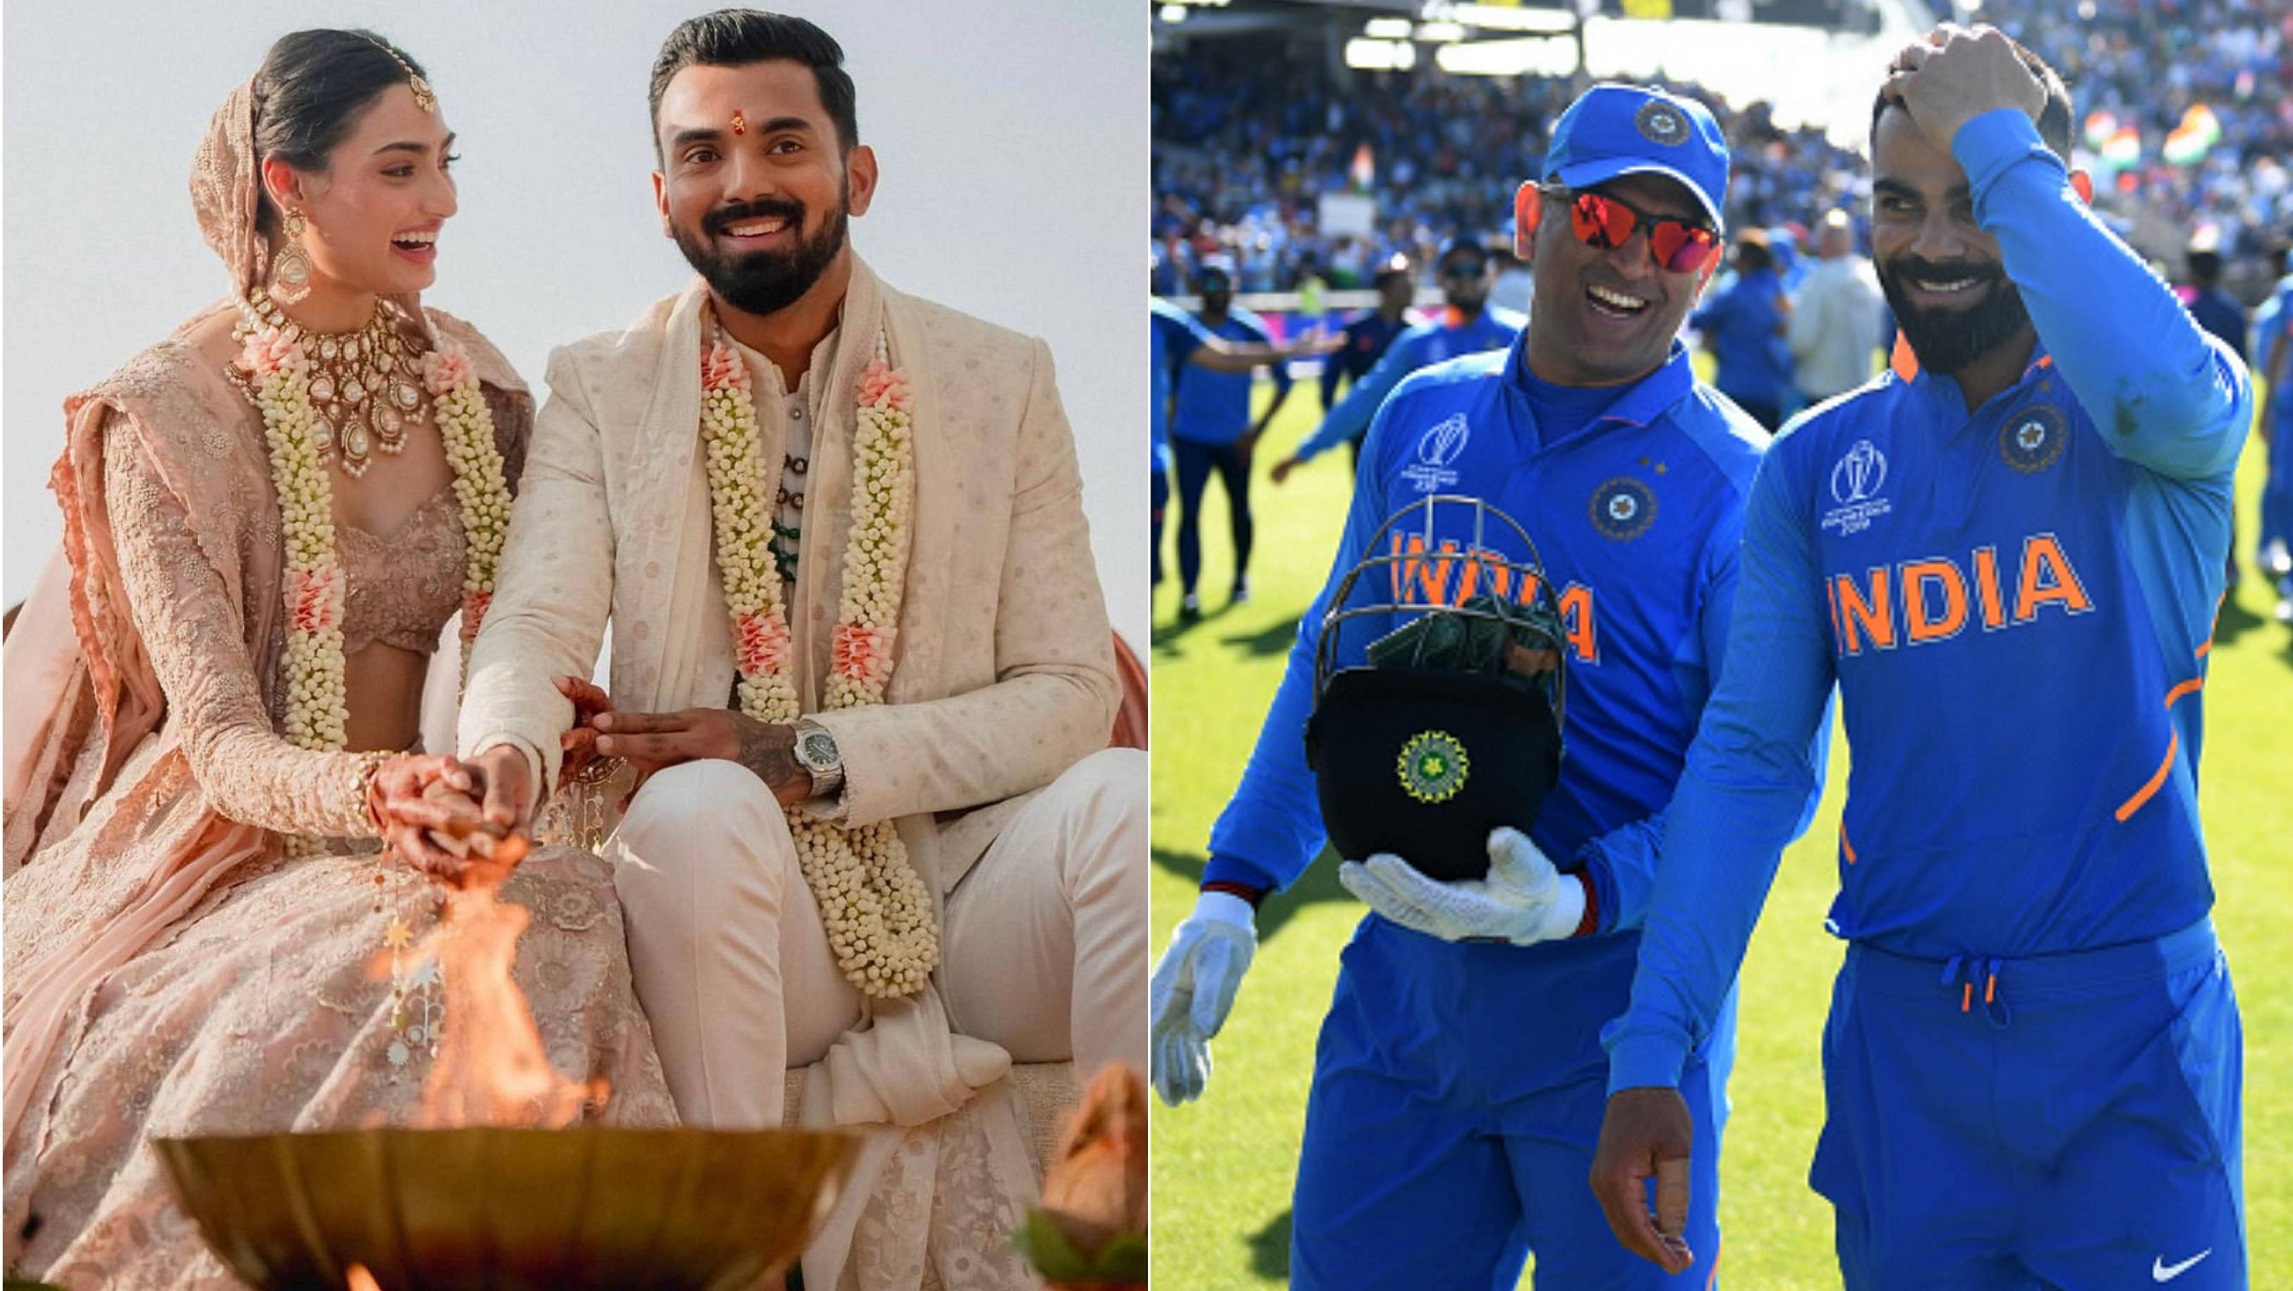 Virat Kohli gifts BMW worth 2.7 crores to KL Rahul, while MS Dhoni also gave him a special gift